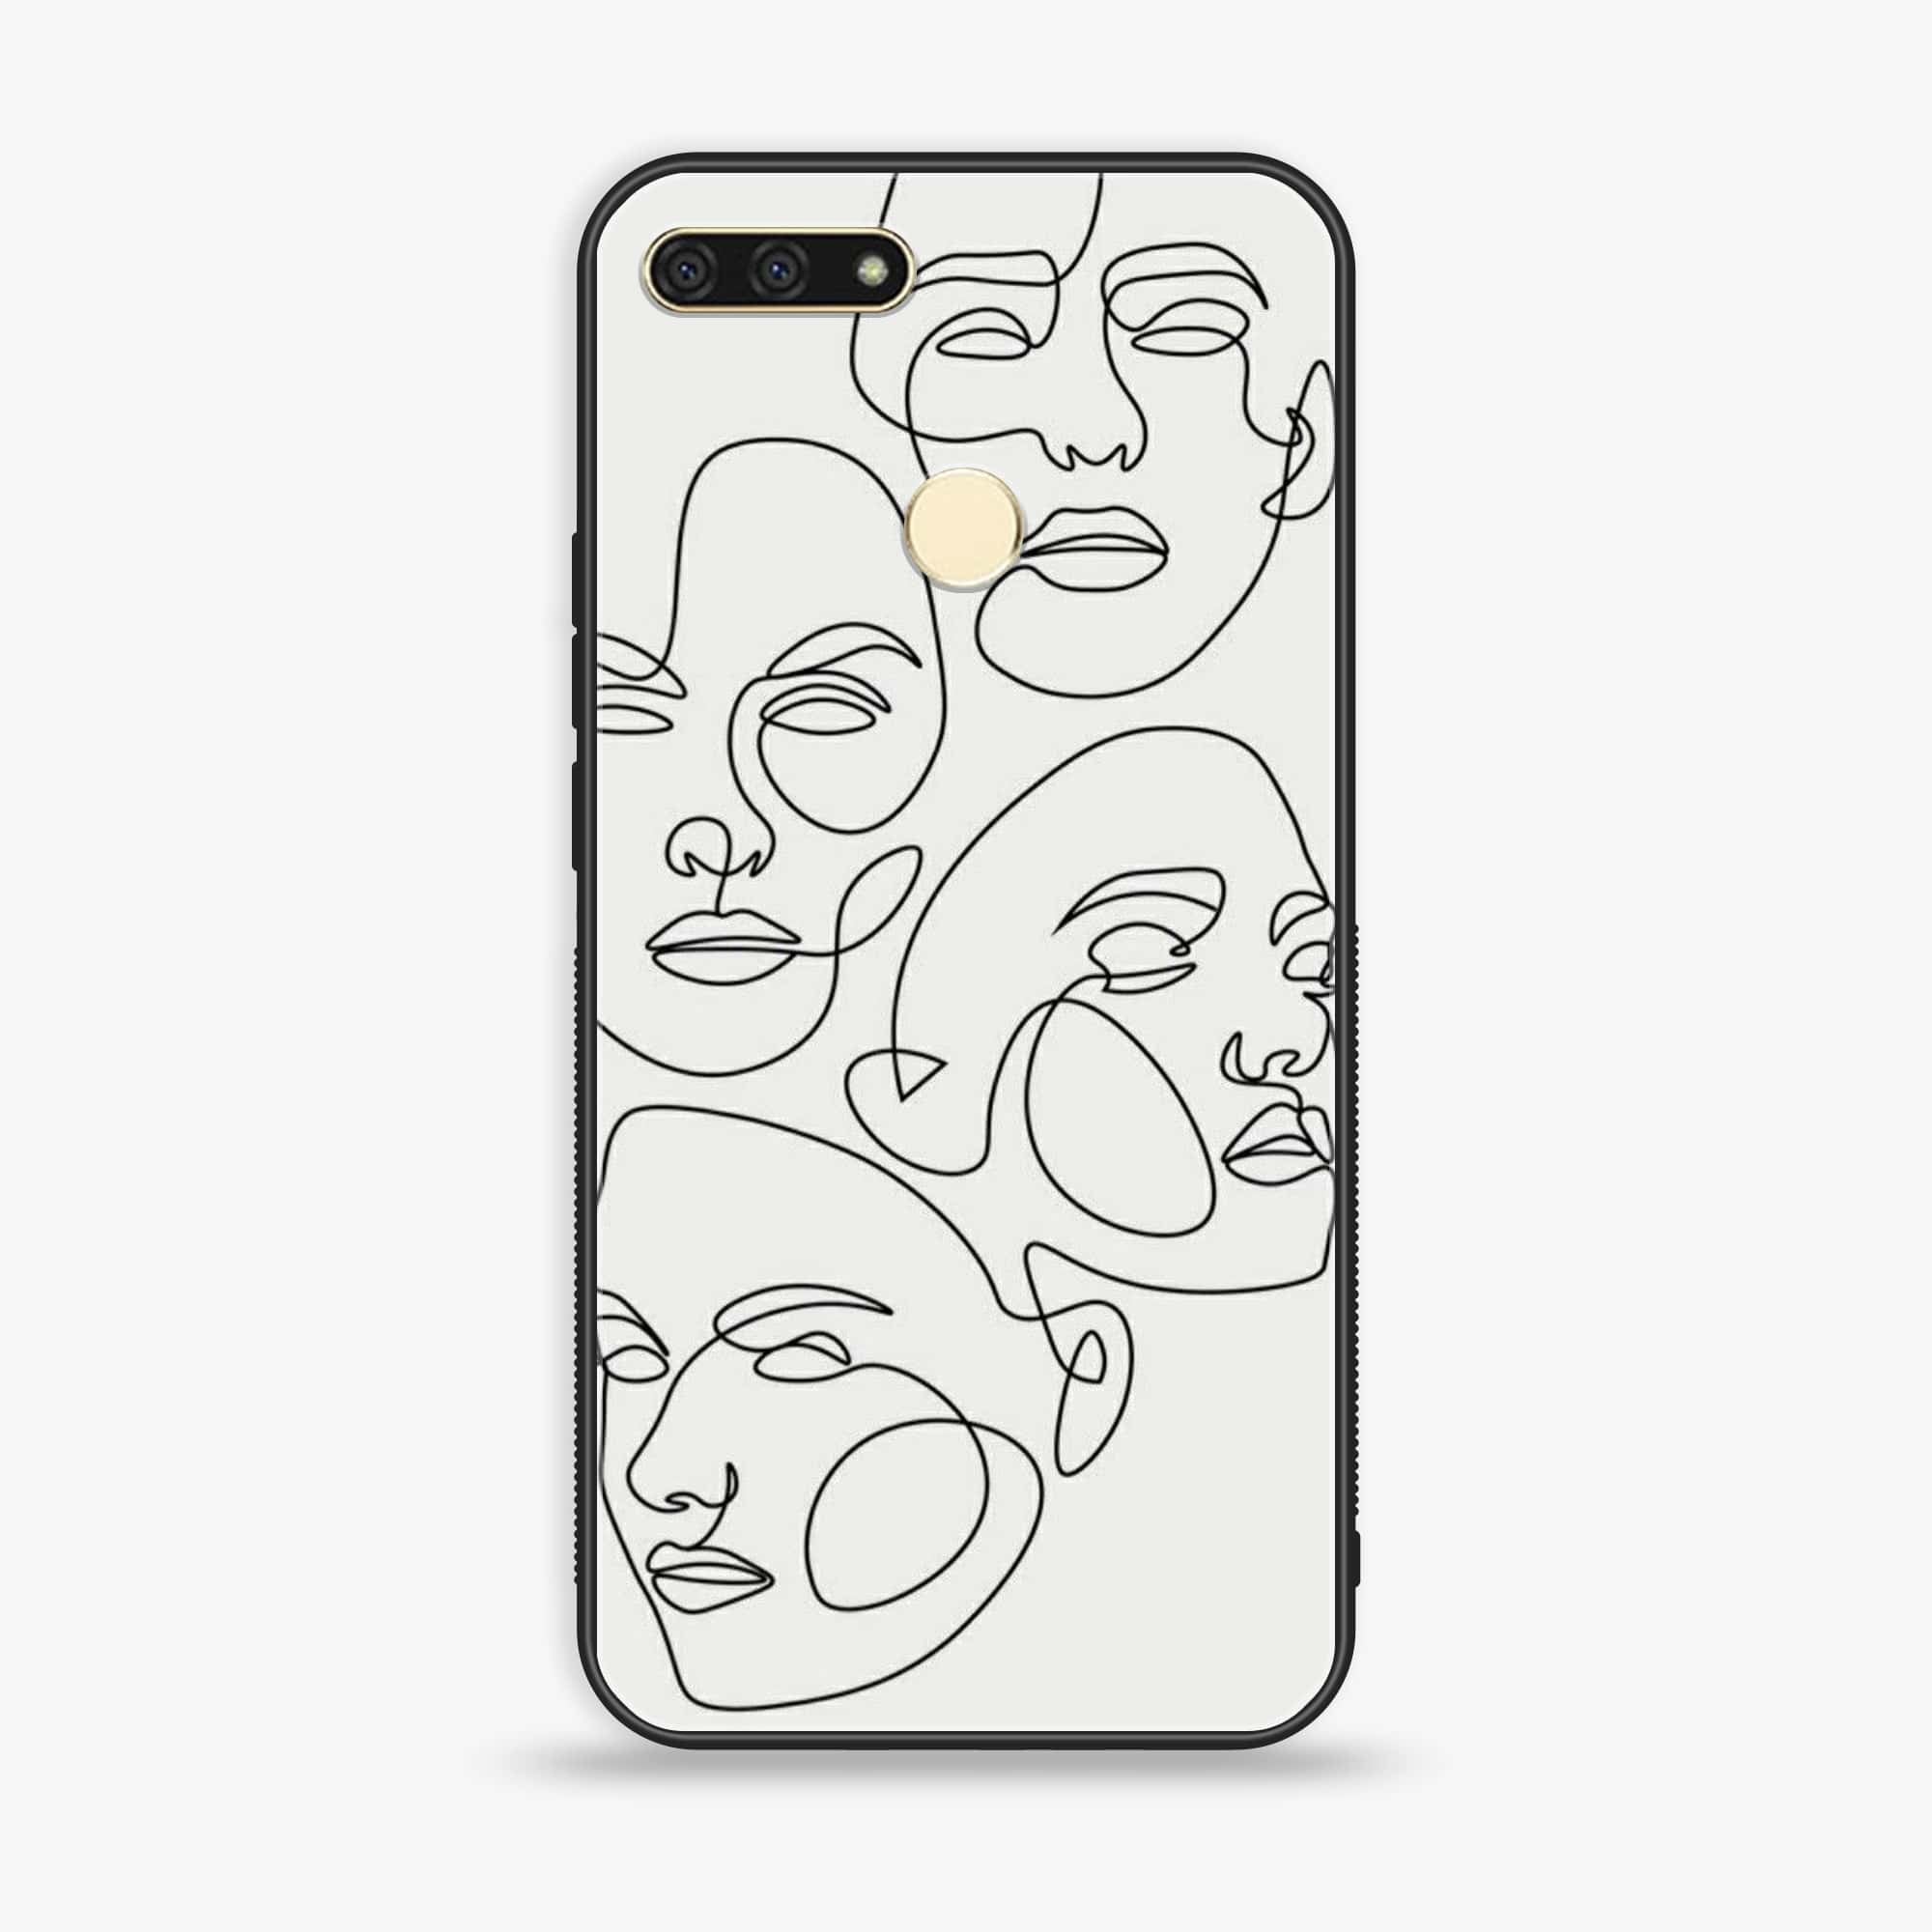 Huawei Y6 2018/Honor Play 7A - Girls Line Art Series  - Premium Printed Glass soft Bumper shock Proof Case